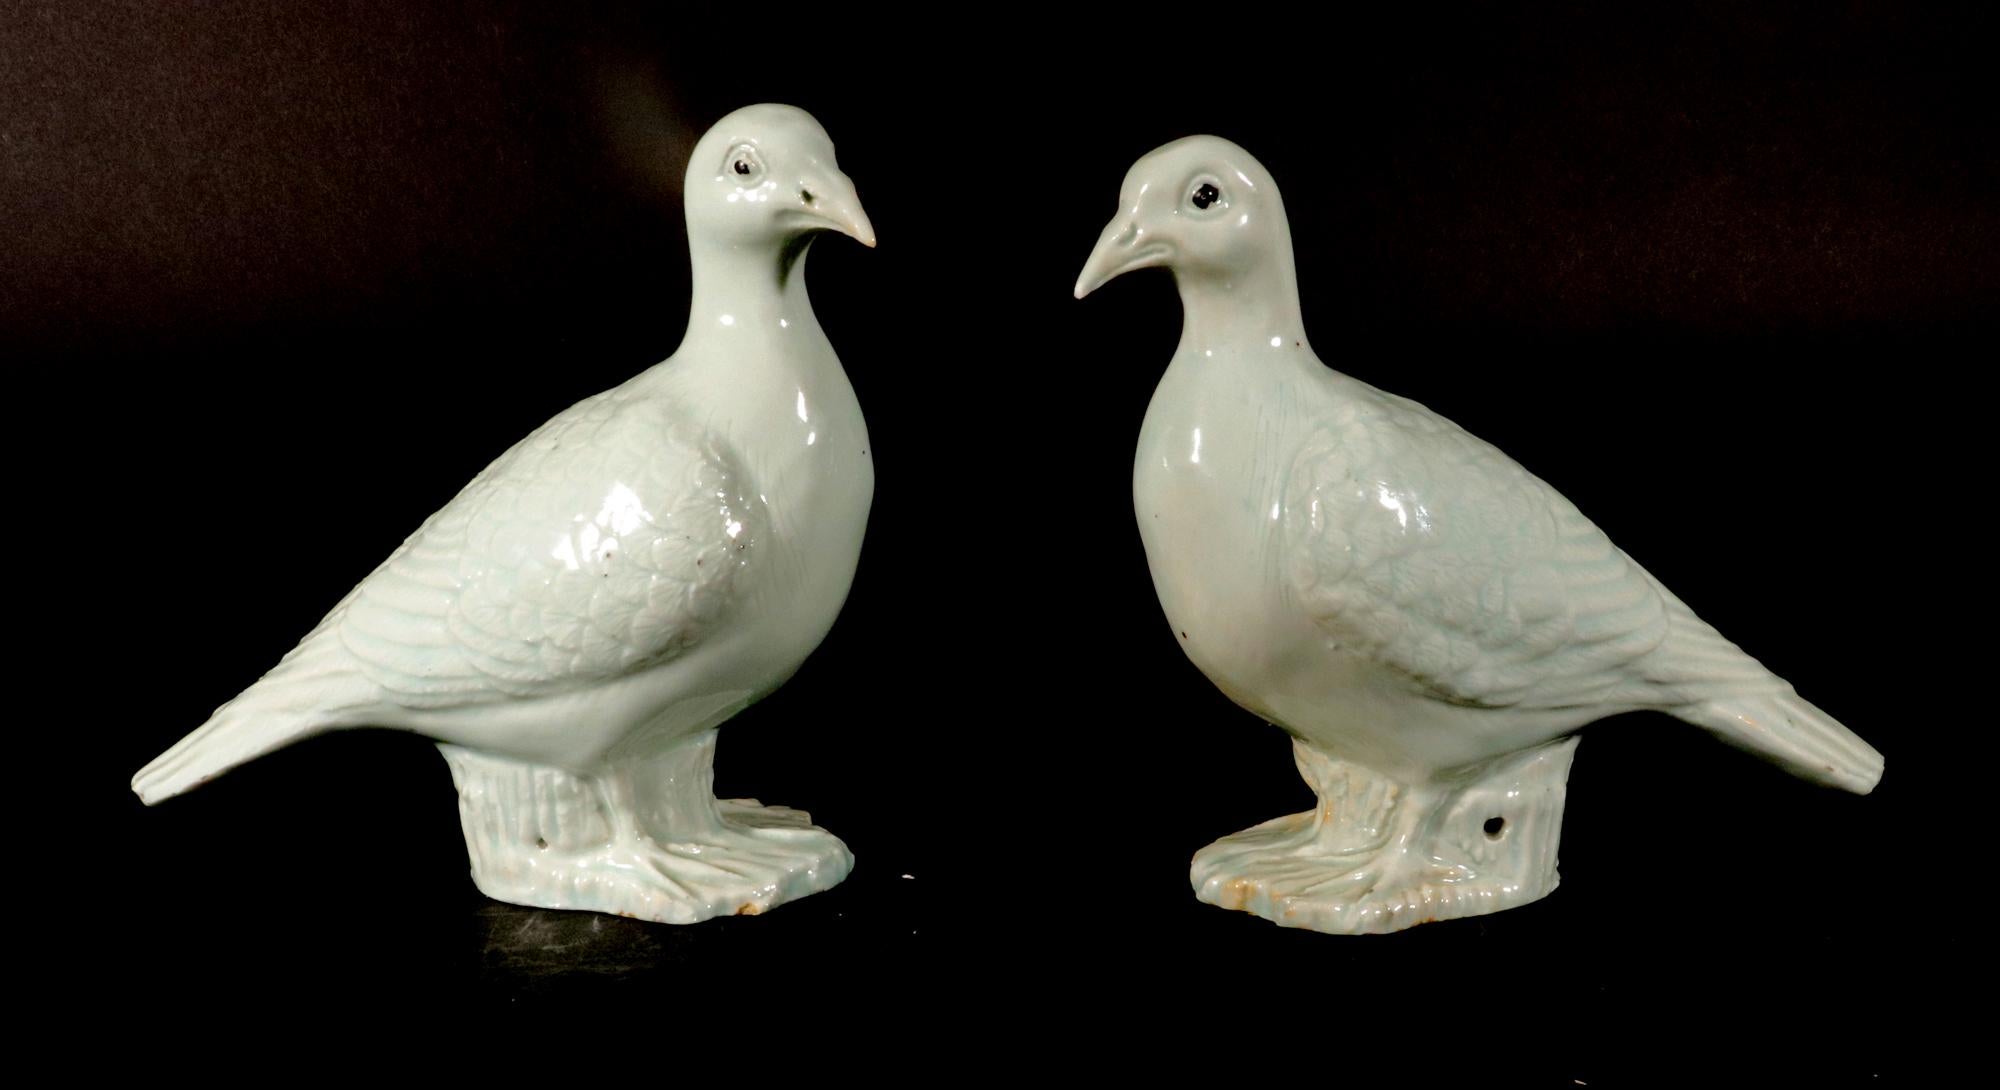 Chinese Export Porcelain Models of White Doves,
Circa 1780

The pair of Chinese Export white doves face each other.  The figures, all in white, stand on a tree stump base, their eyes in brown, with their heads slight cocked.

Dimensions: 6 7./8